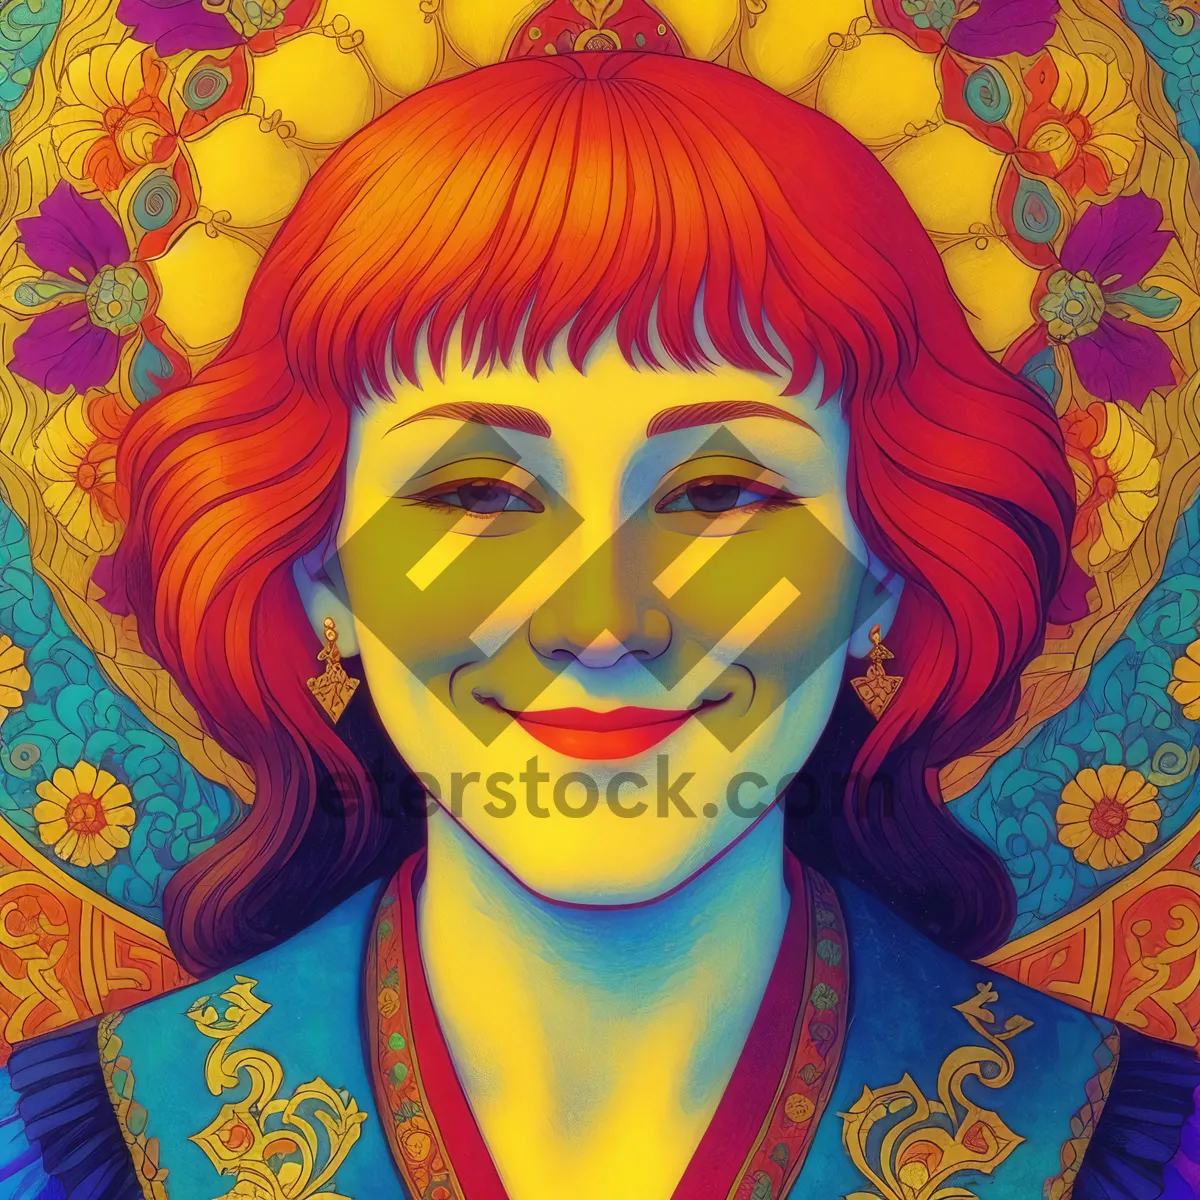 Picture of Colorful Cartoon Clip Art Portrait of a Person.